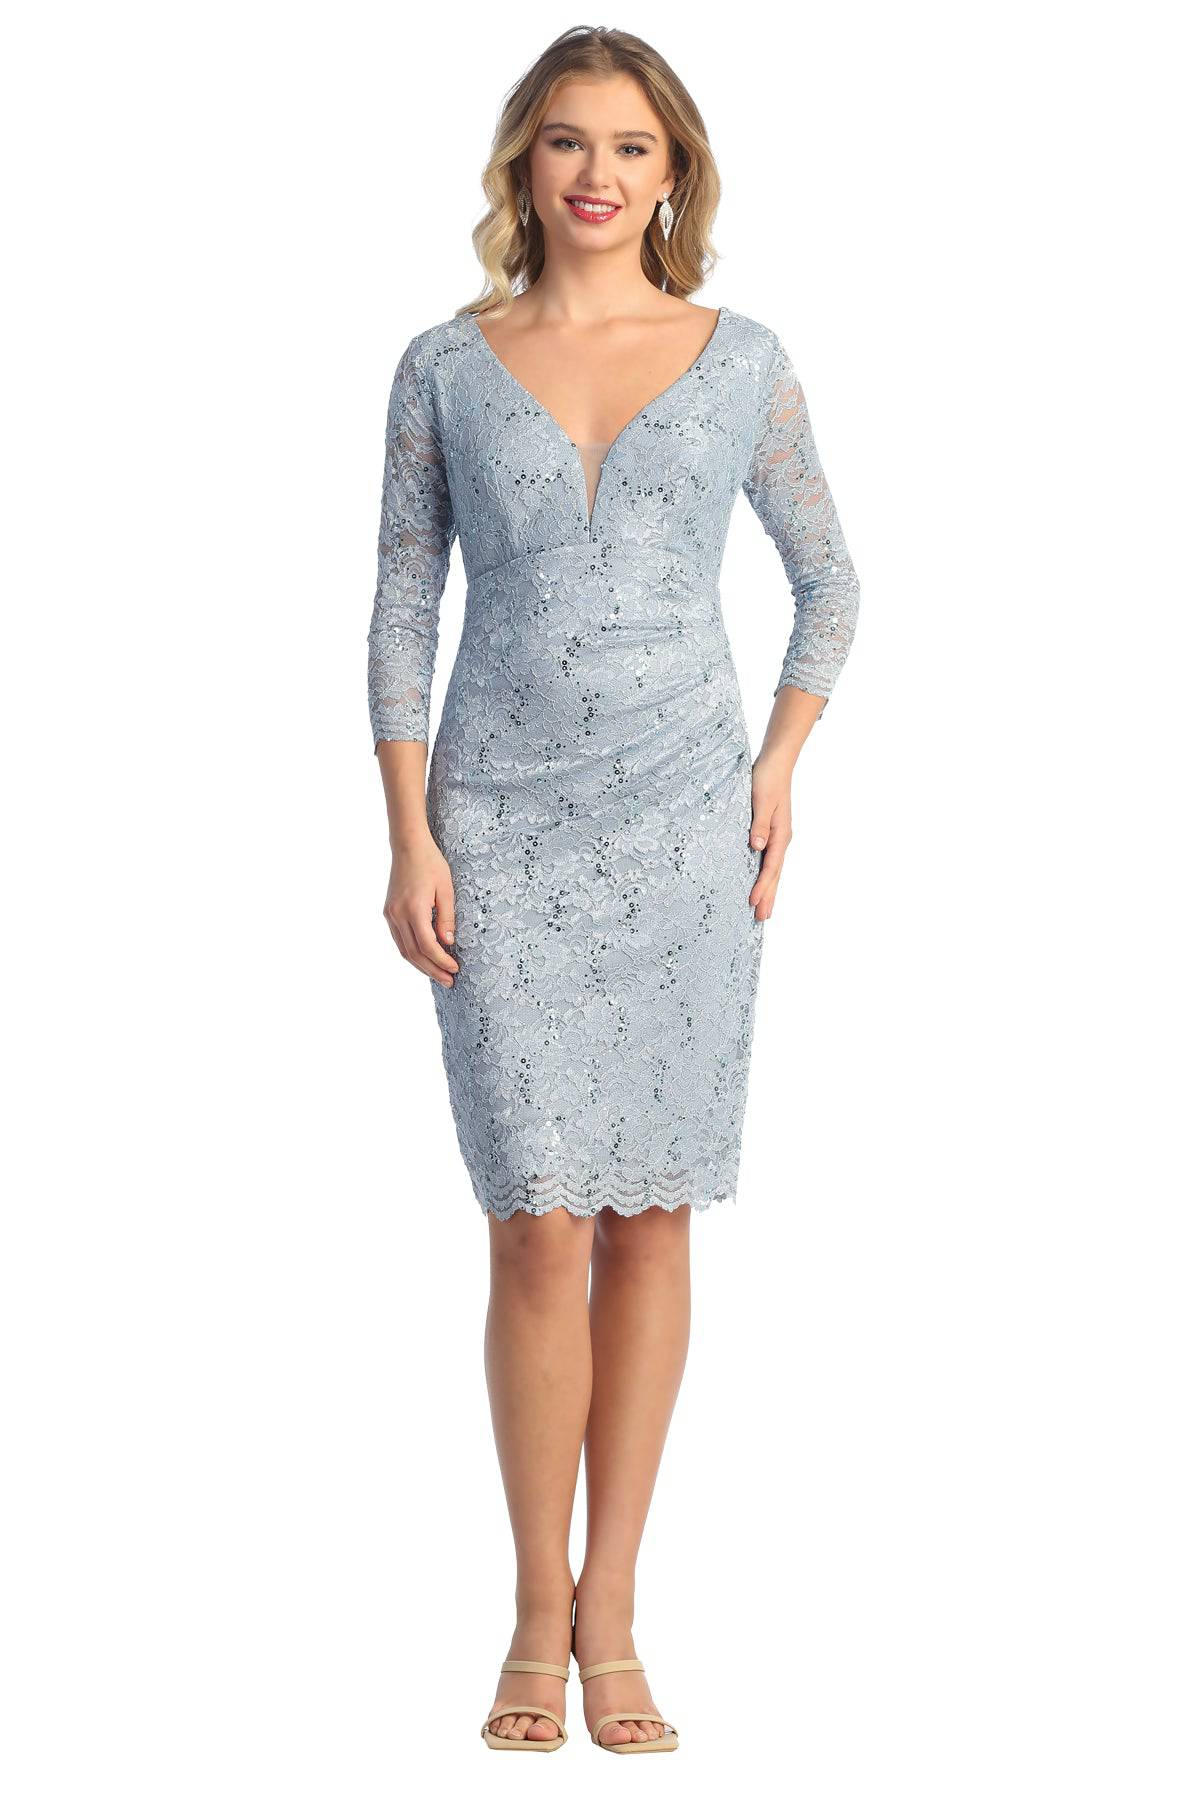 Cindy Collection 1749 Lace & Sequin Short Dress - NORMA REED